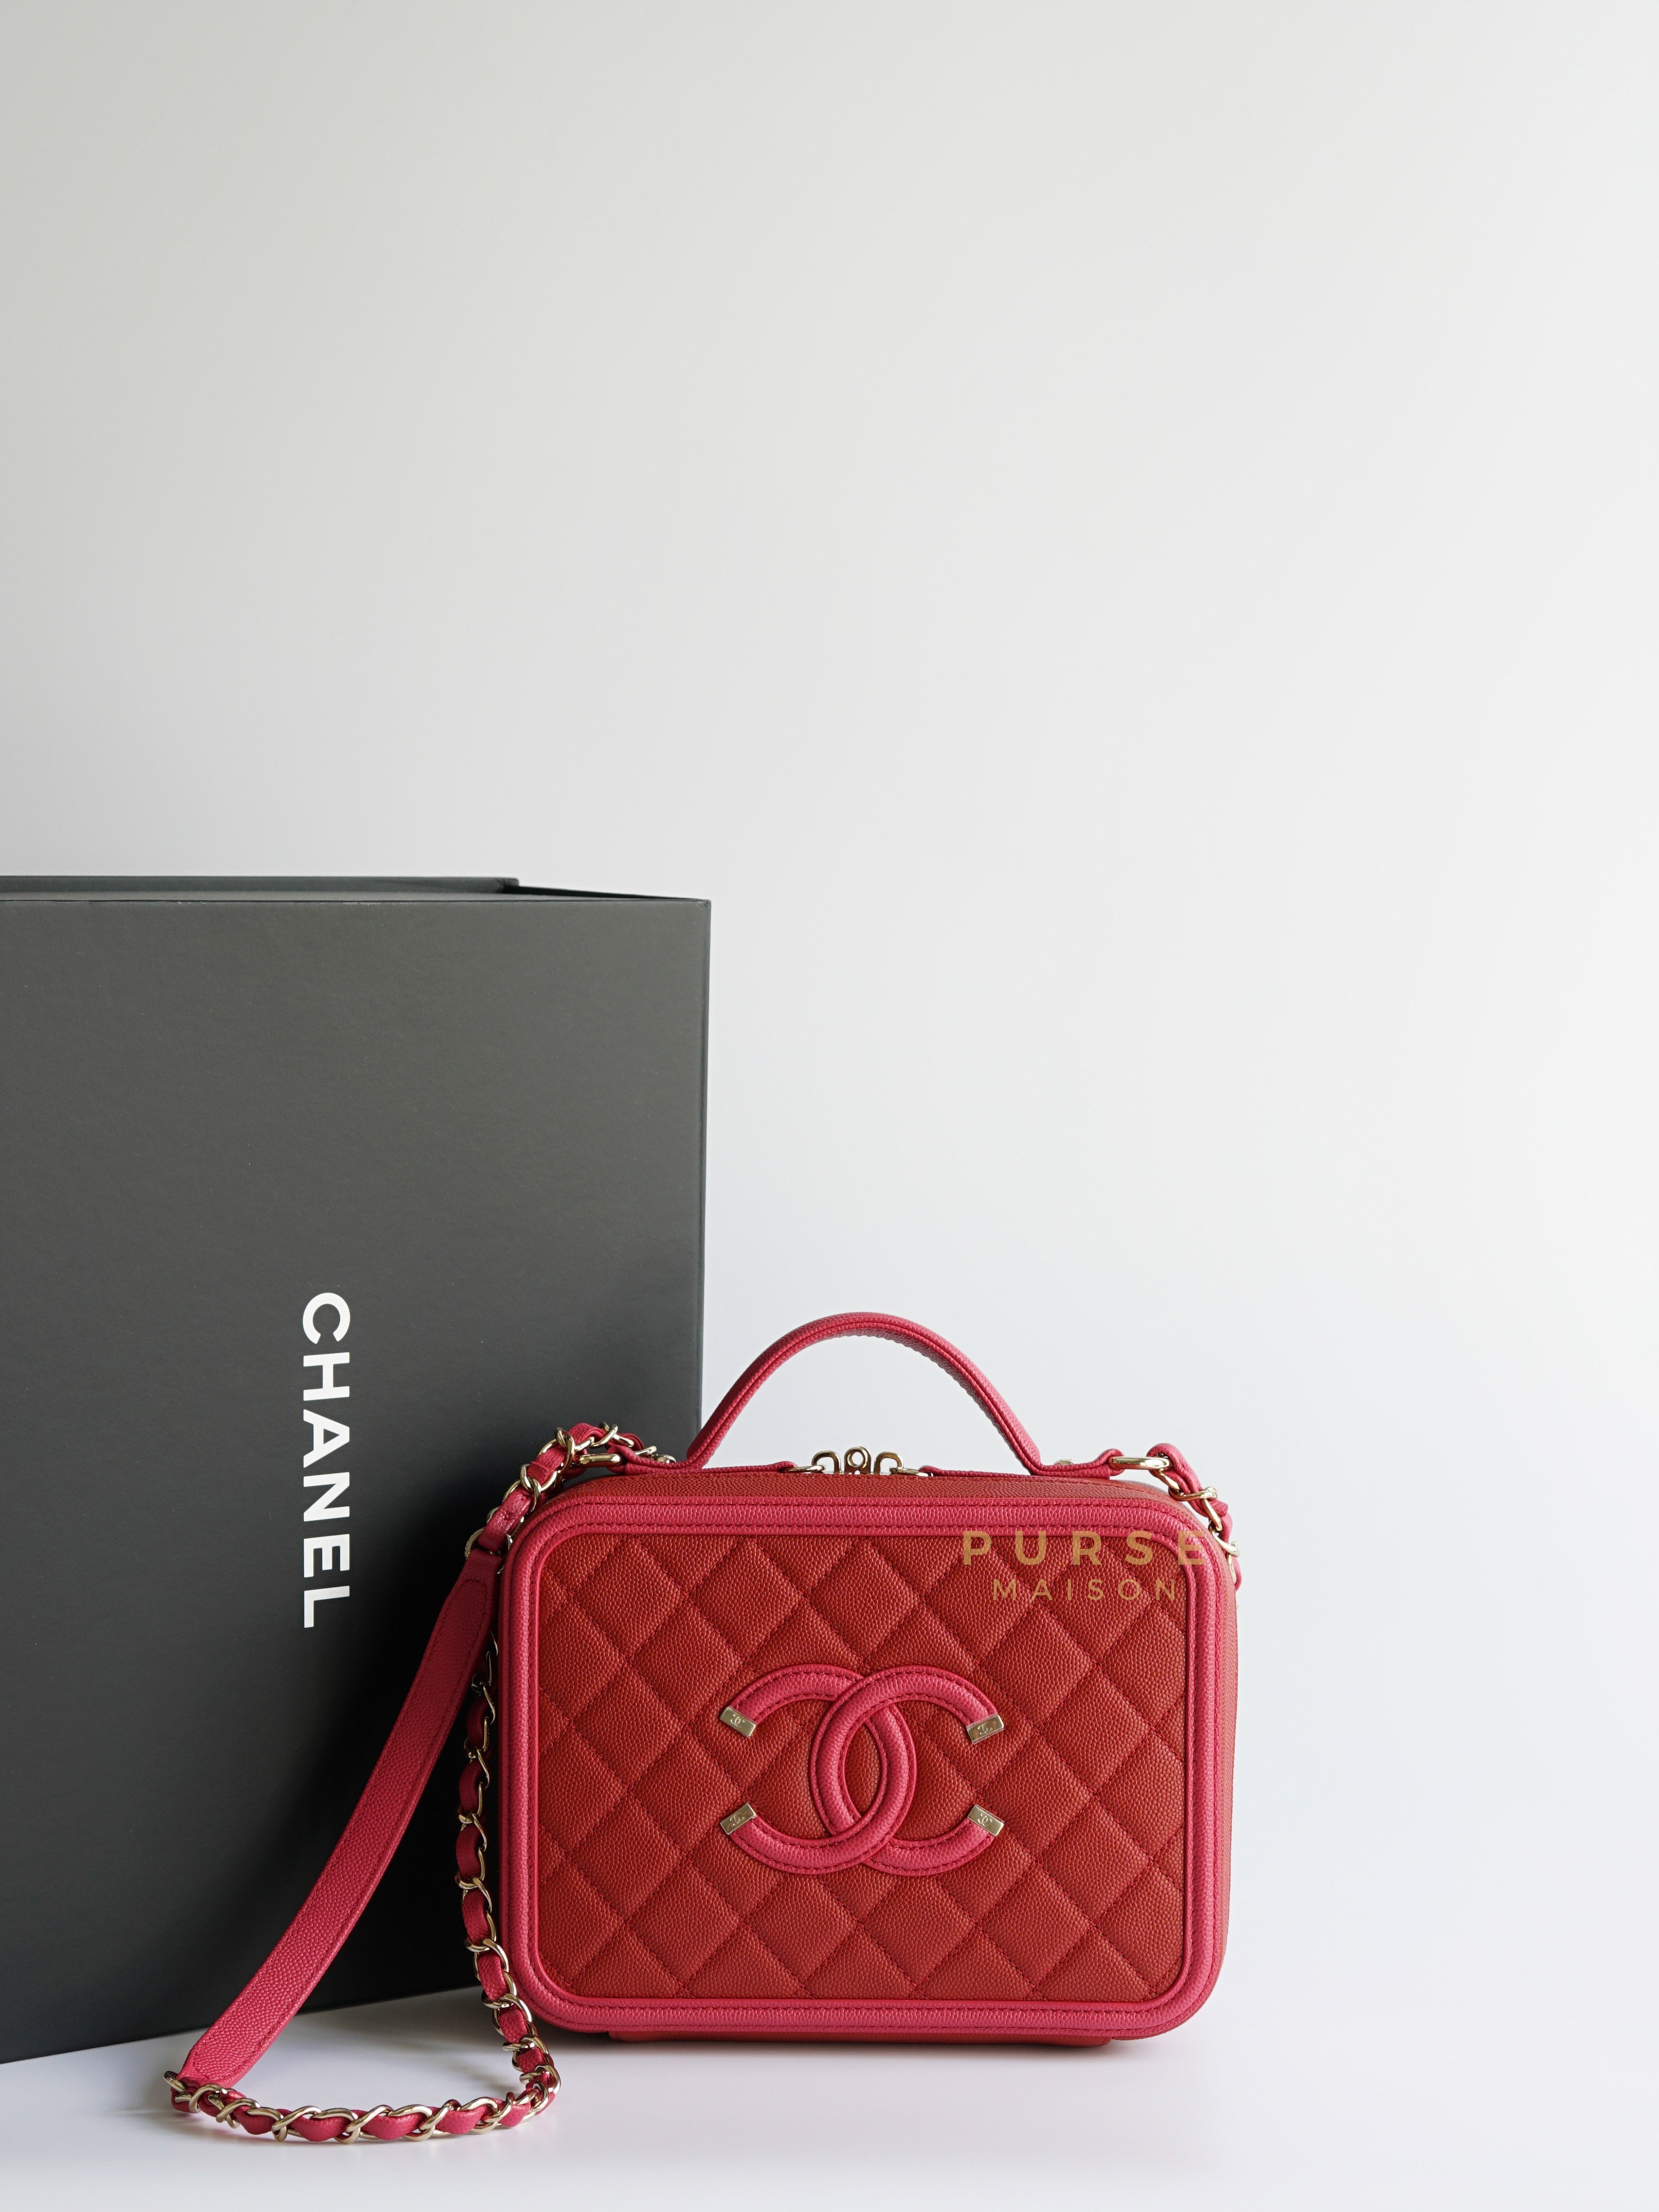 CC Filigree Medium Vanity Bag in Red/Pink Caviar Leather and Gold Hardware Series 29 | Purse Maison Luxury Bags Shop